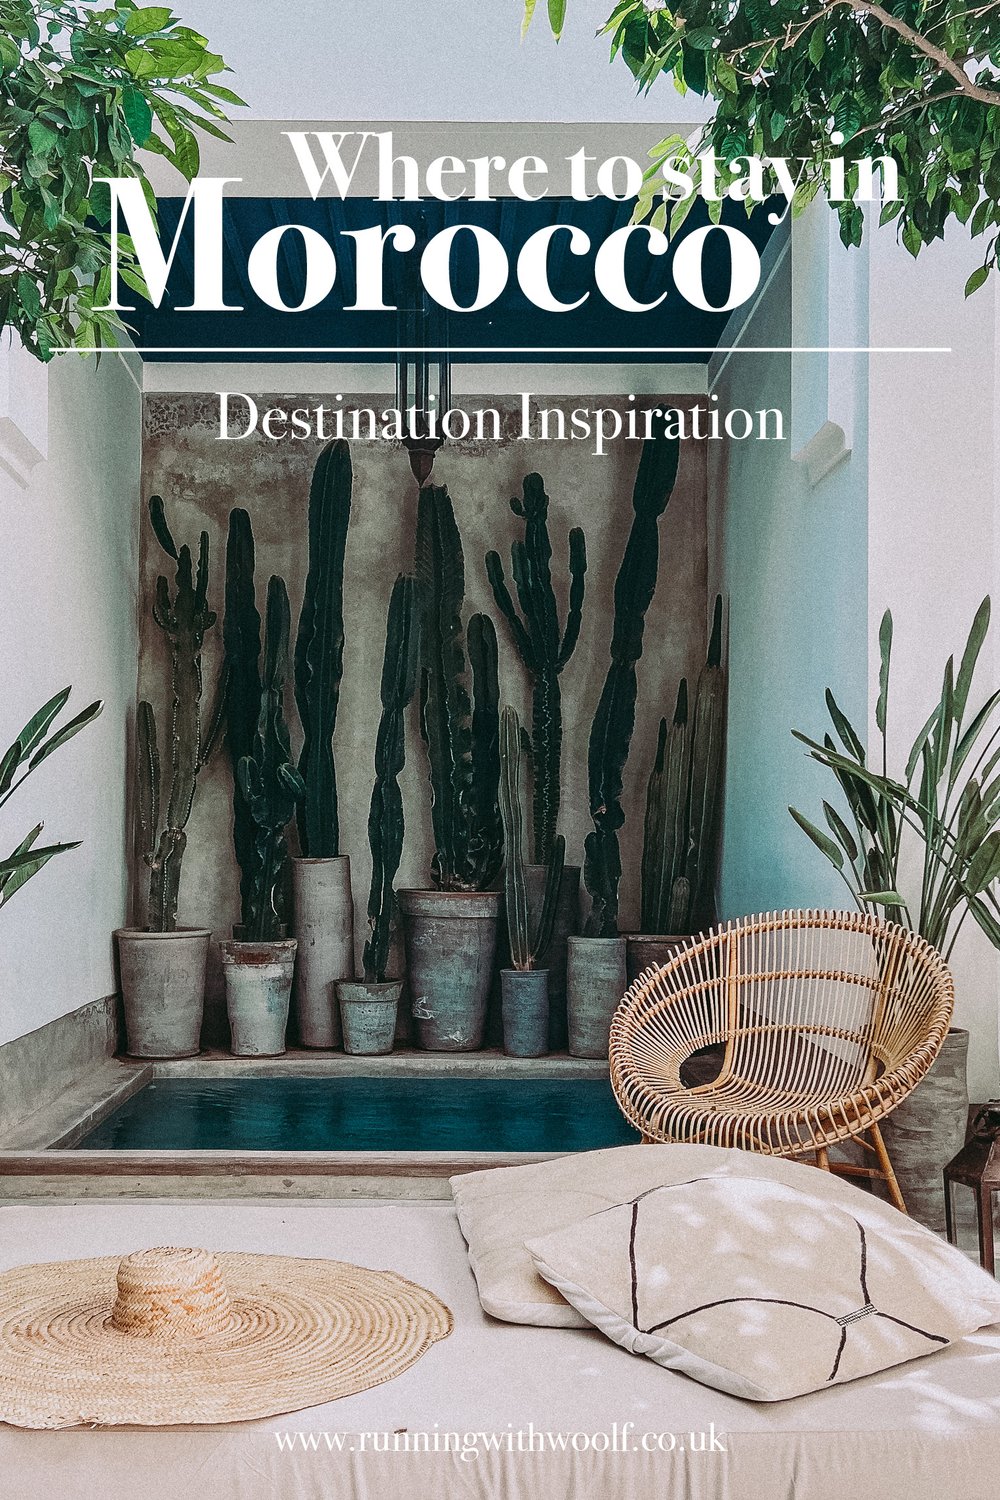 Where to stay in Morocco 1.jpg